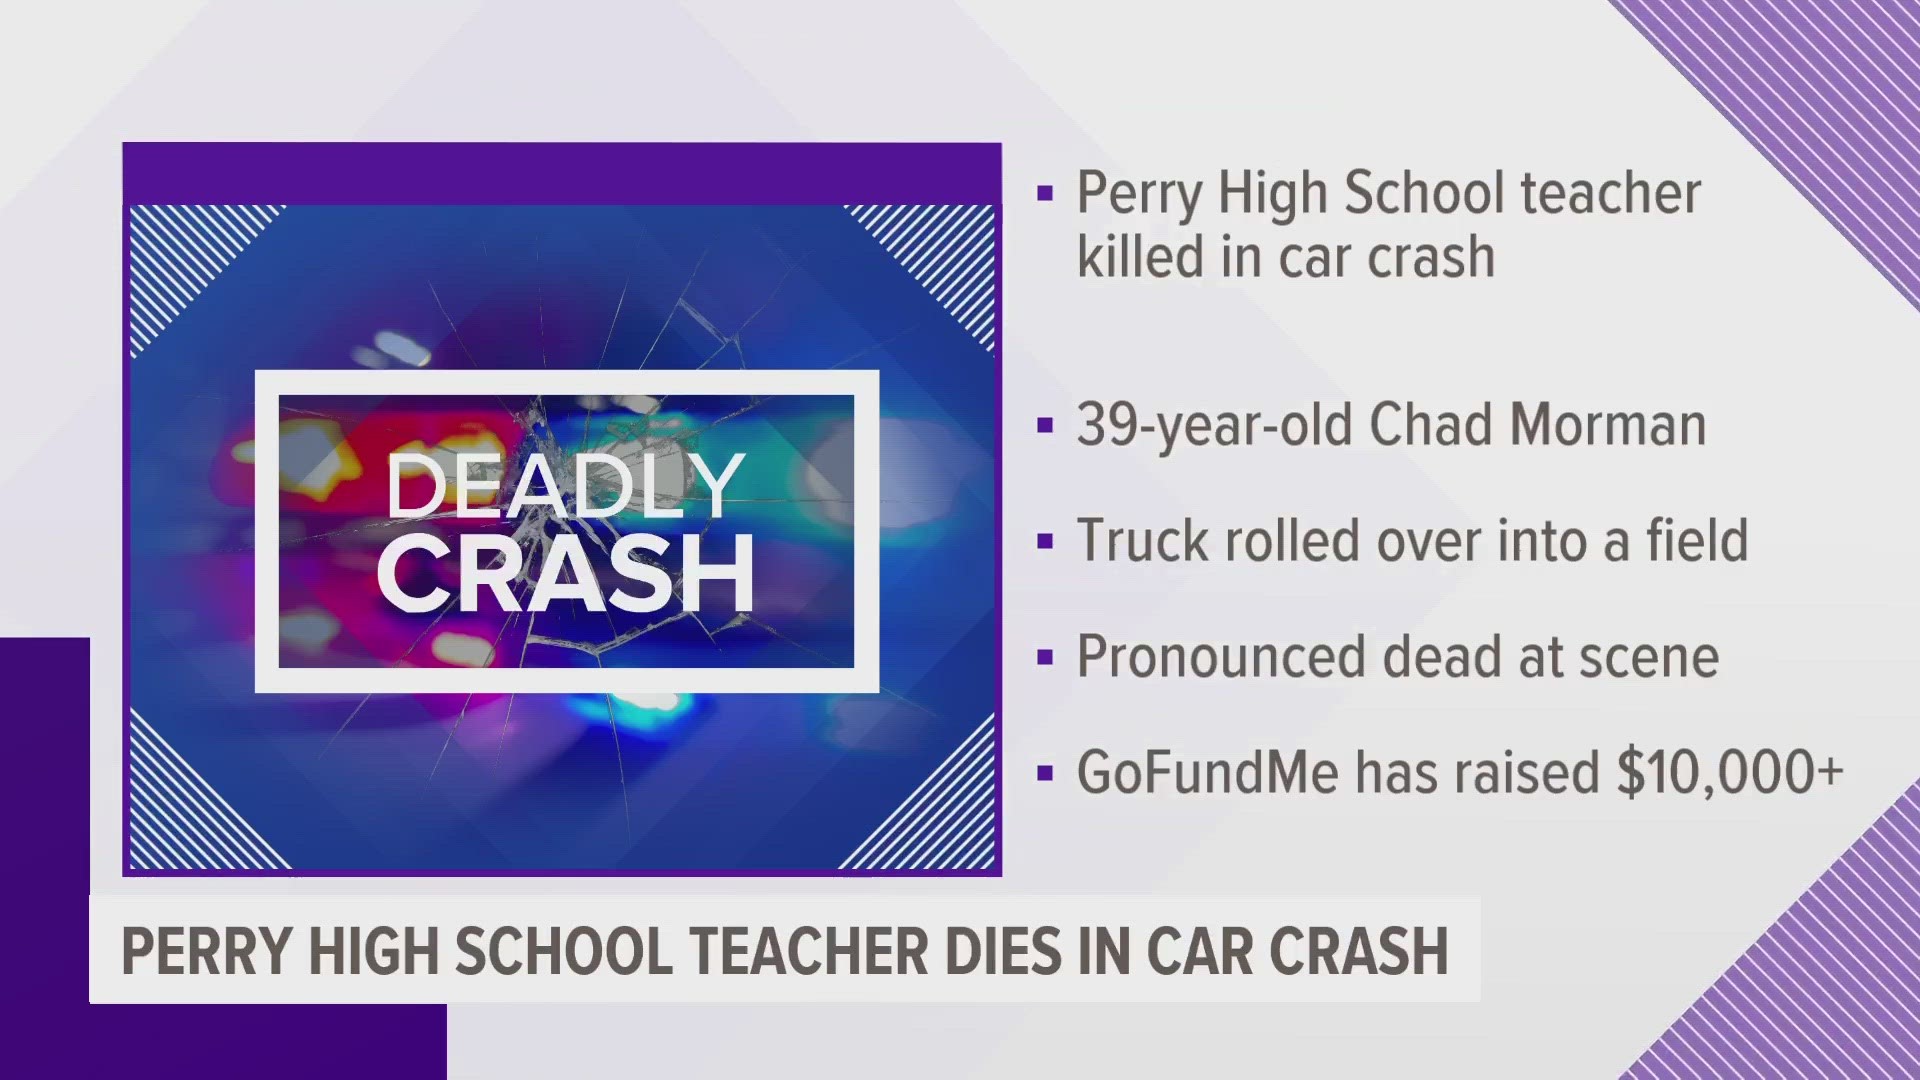 39-year-old Chad Morman was an industrial technology teacher at Perry High School.